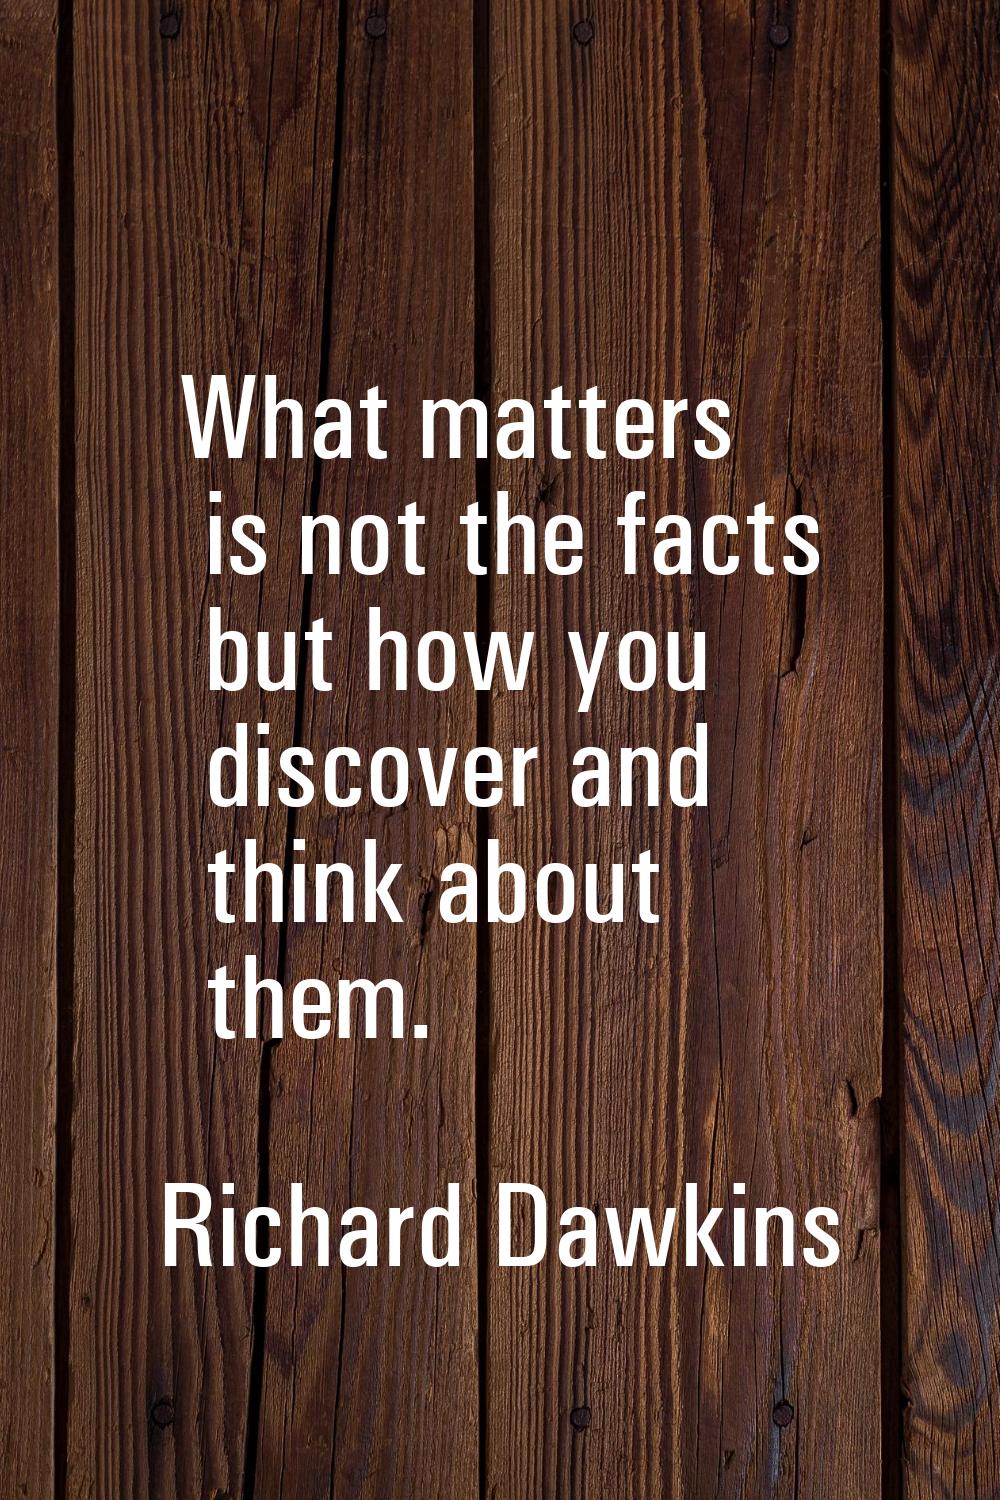 What matters is not the facts but how you discover and think about them.